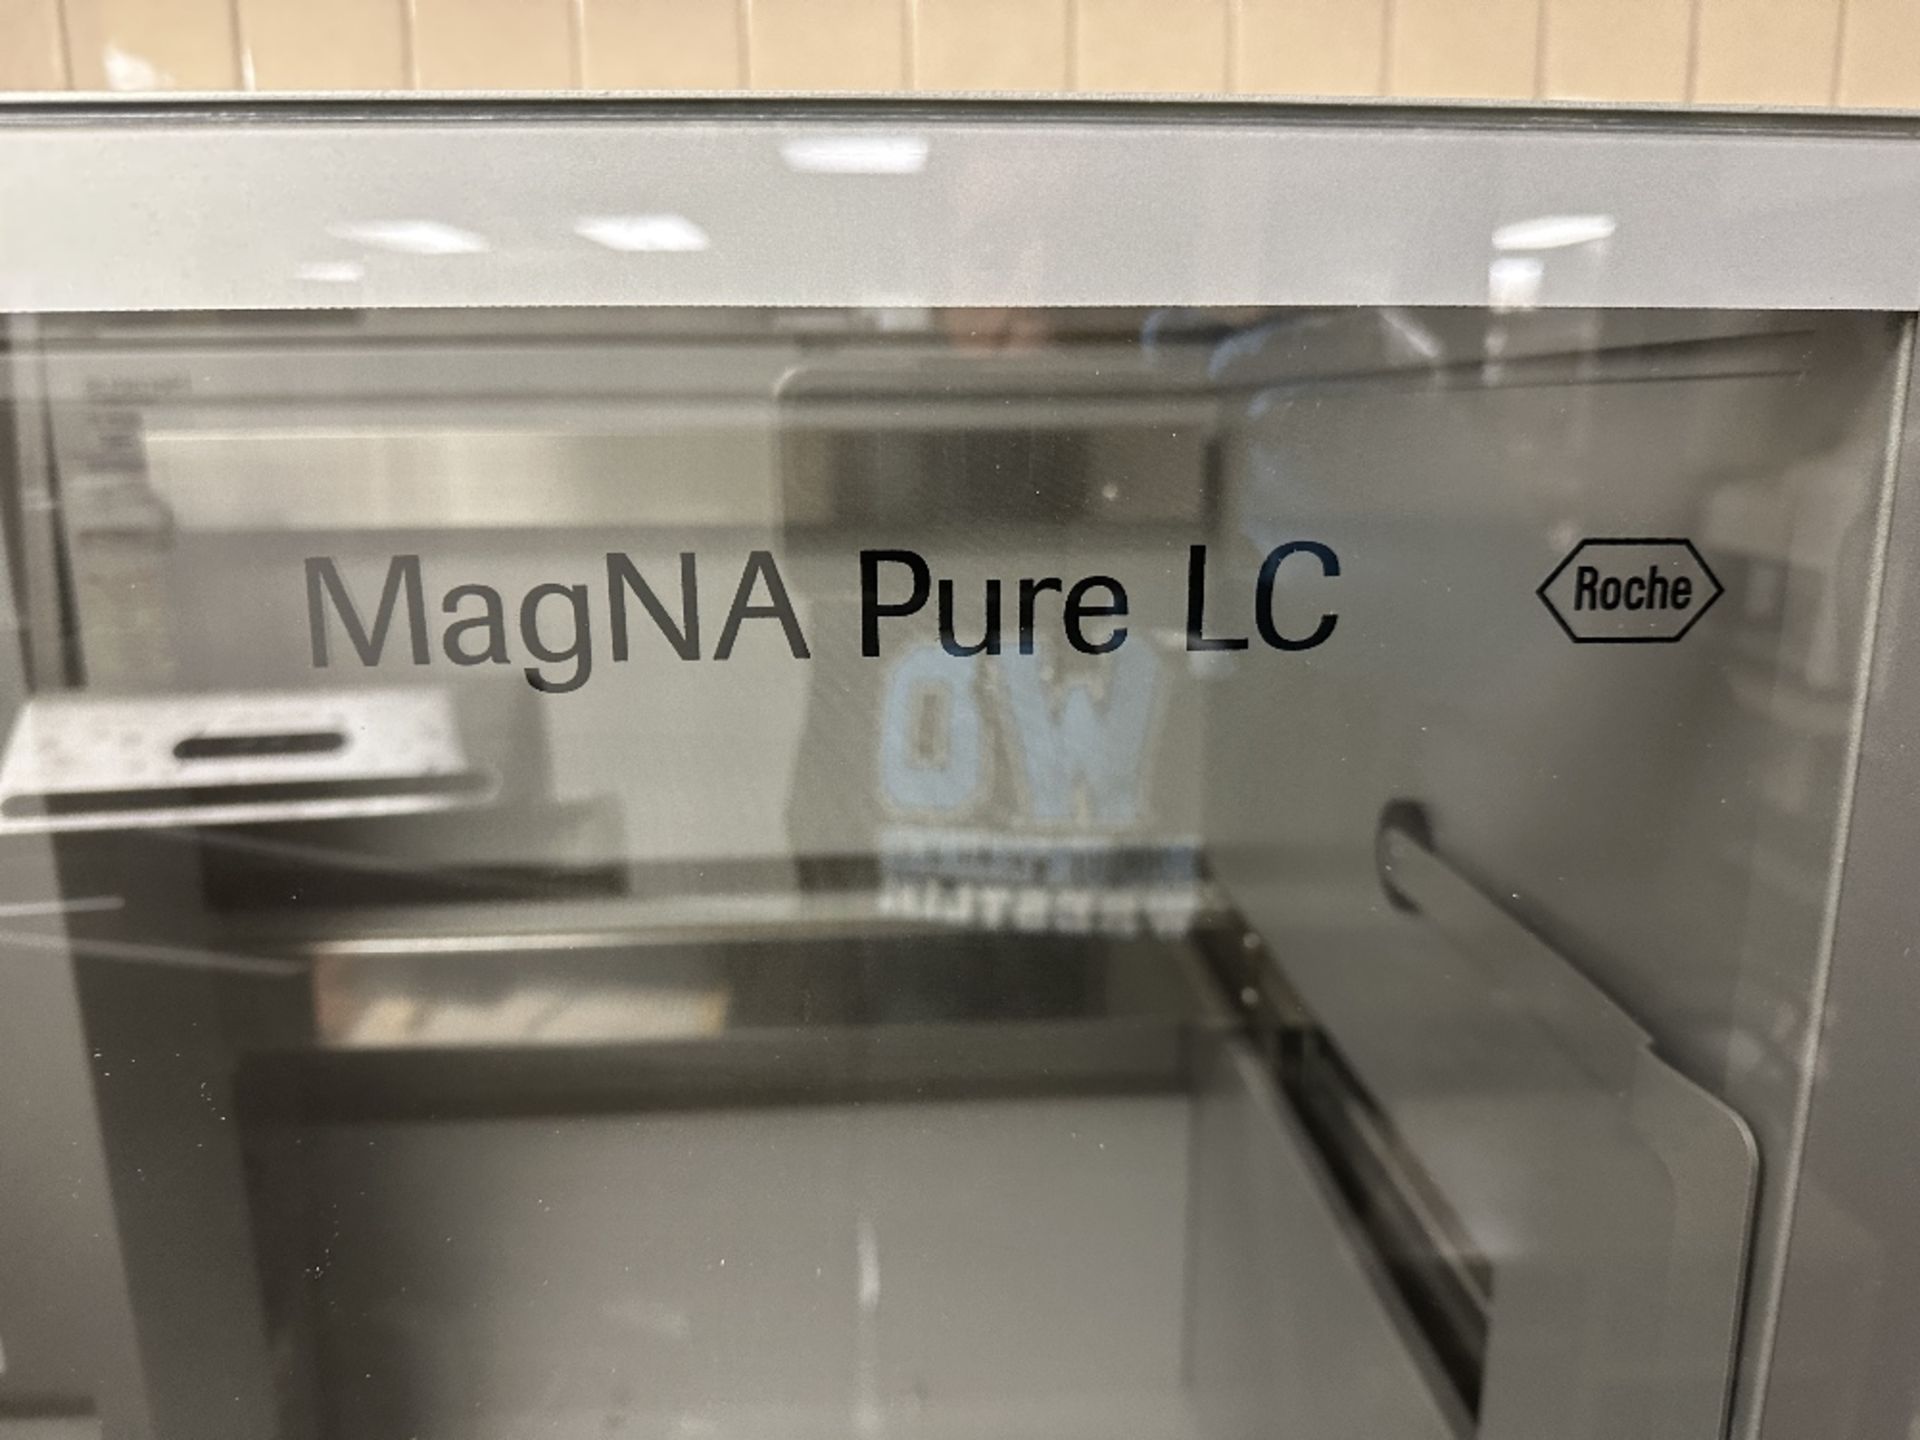 ROCHE MagNA Pure LC Acid Work Station JE379 (LOCATED IN MIDDLETOWN, N.Y.)-FOR PACKAGING & SHIPPING - Image 2 of 5